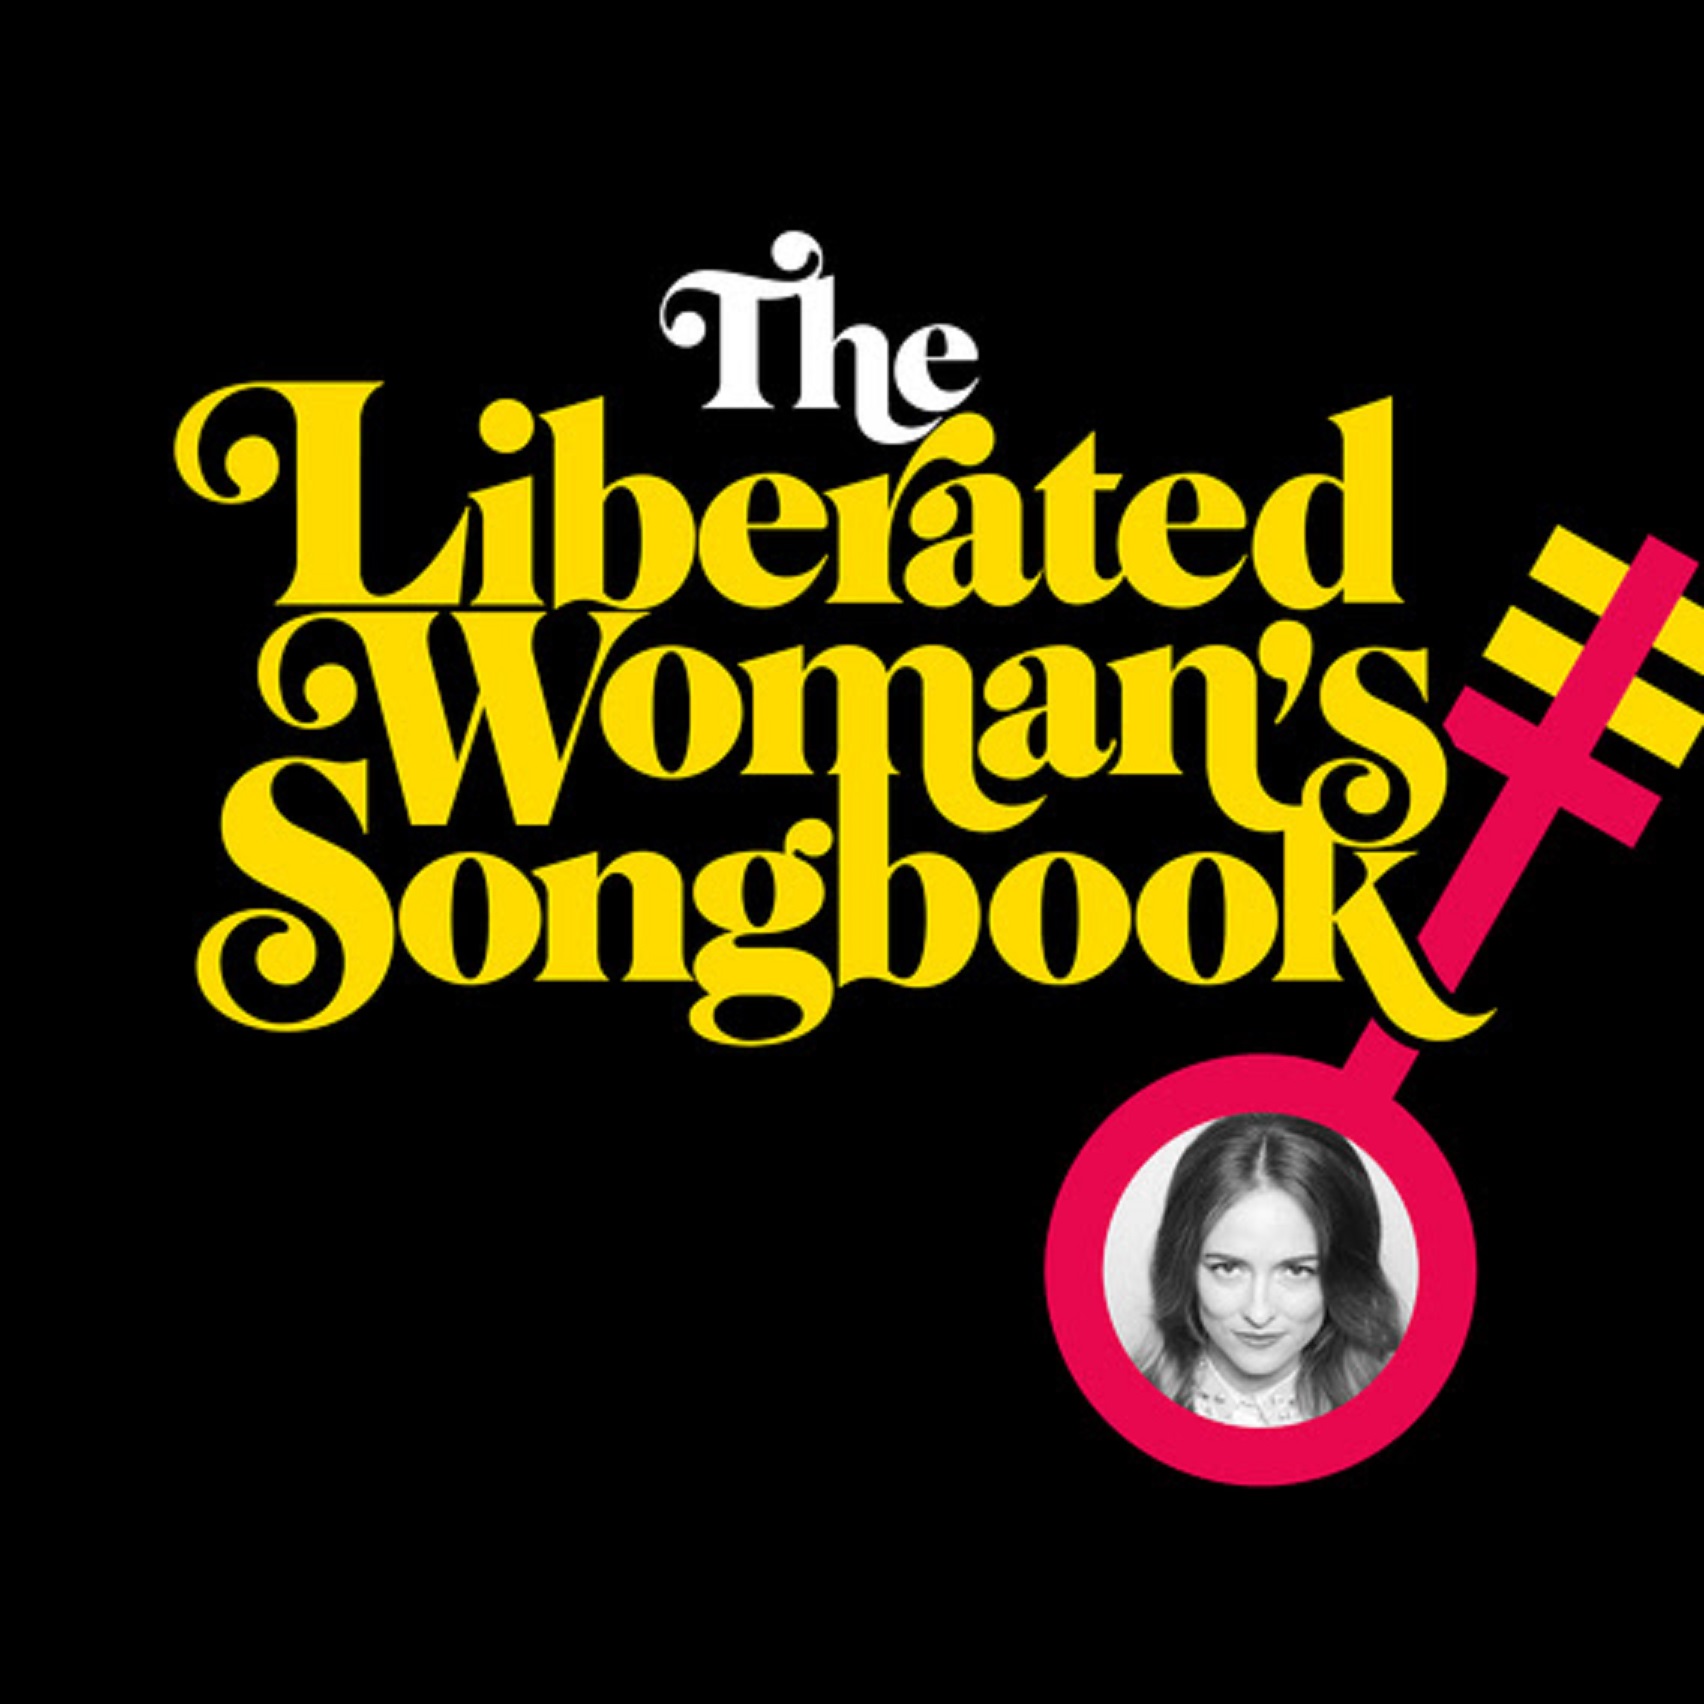 Dawn Landes Traces the Women's Rights Movement Through Song on THE LIBERATED WOMAN'S SONGBOOK Out March 29th